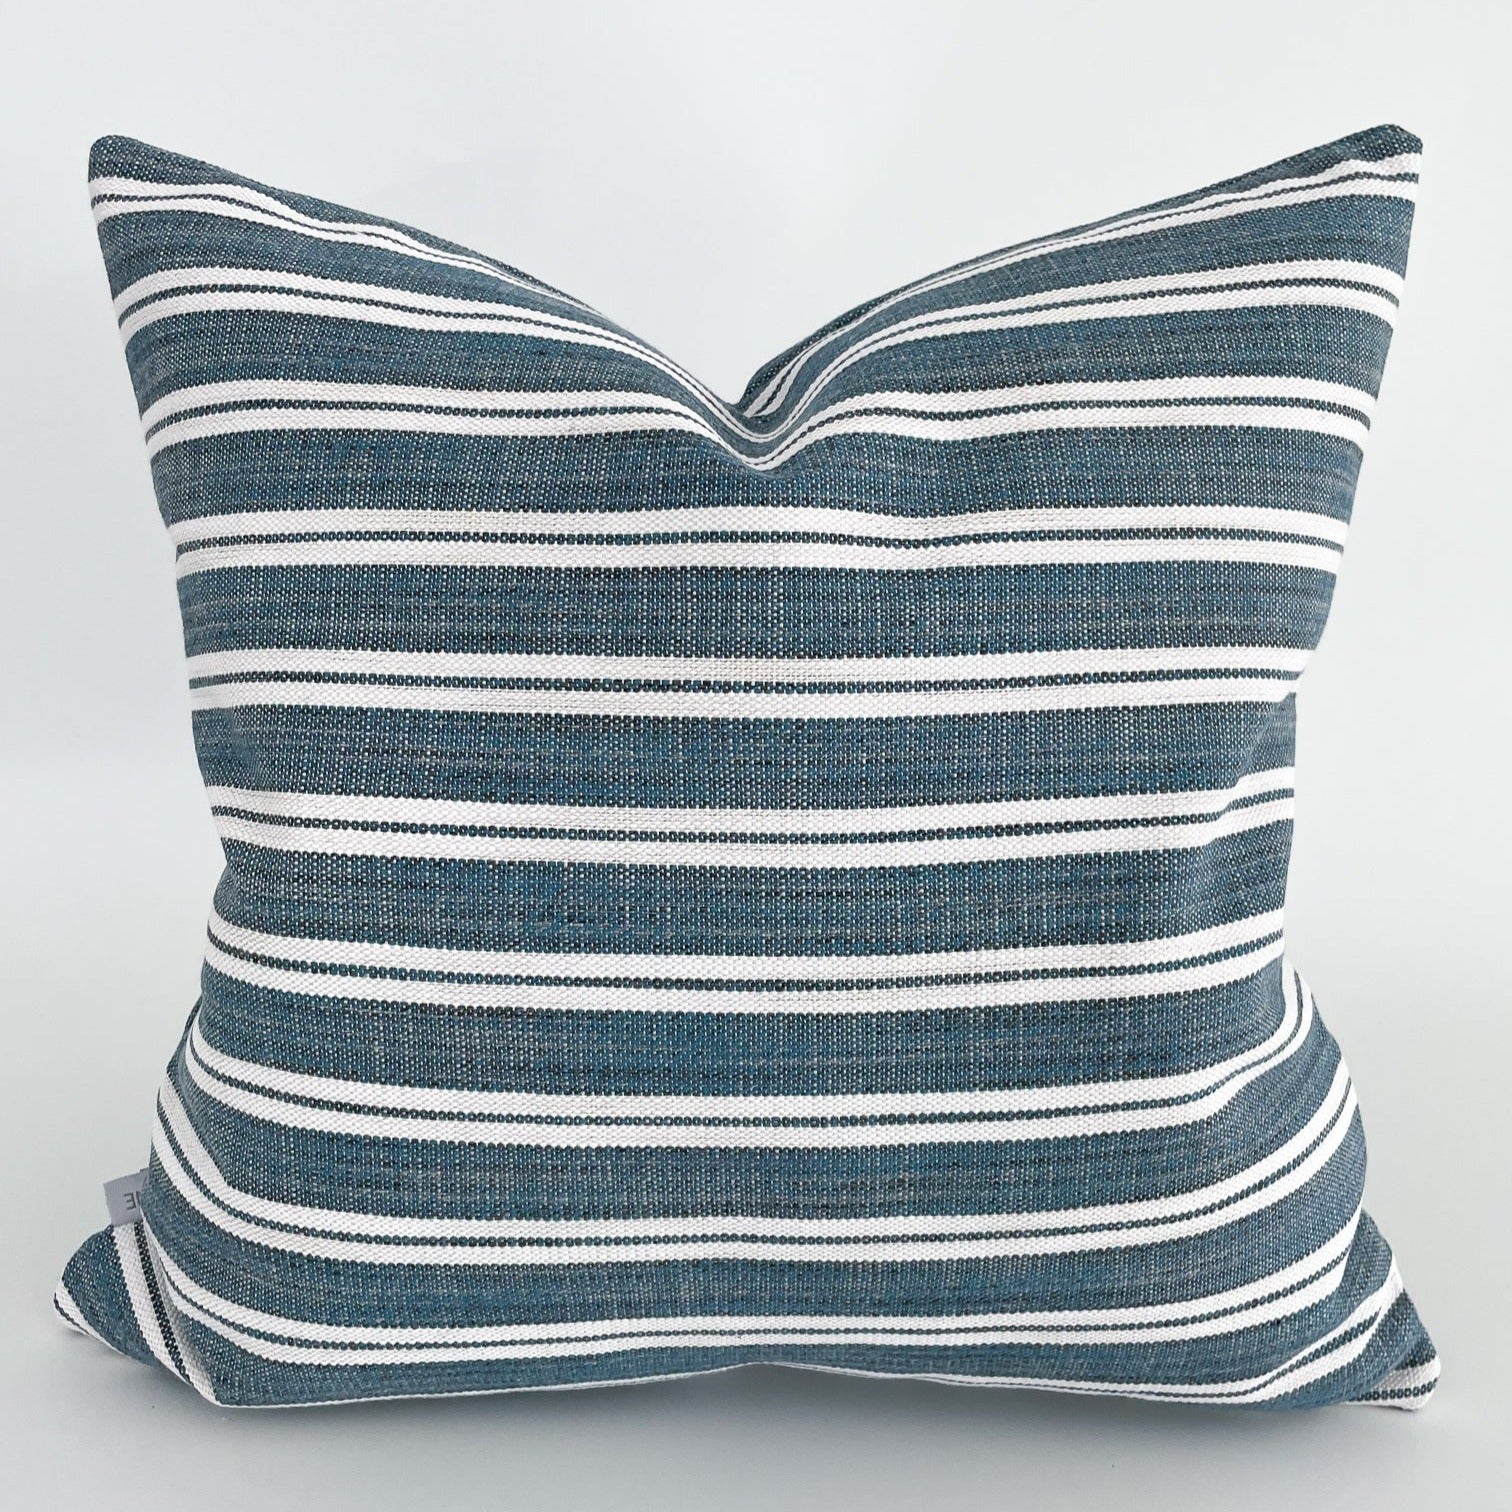 Peyton Blue Indoor/Outdoor Pillow Cover (ON THE SHELF)